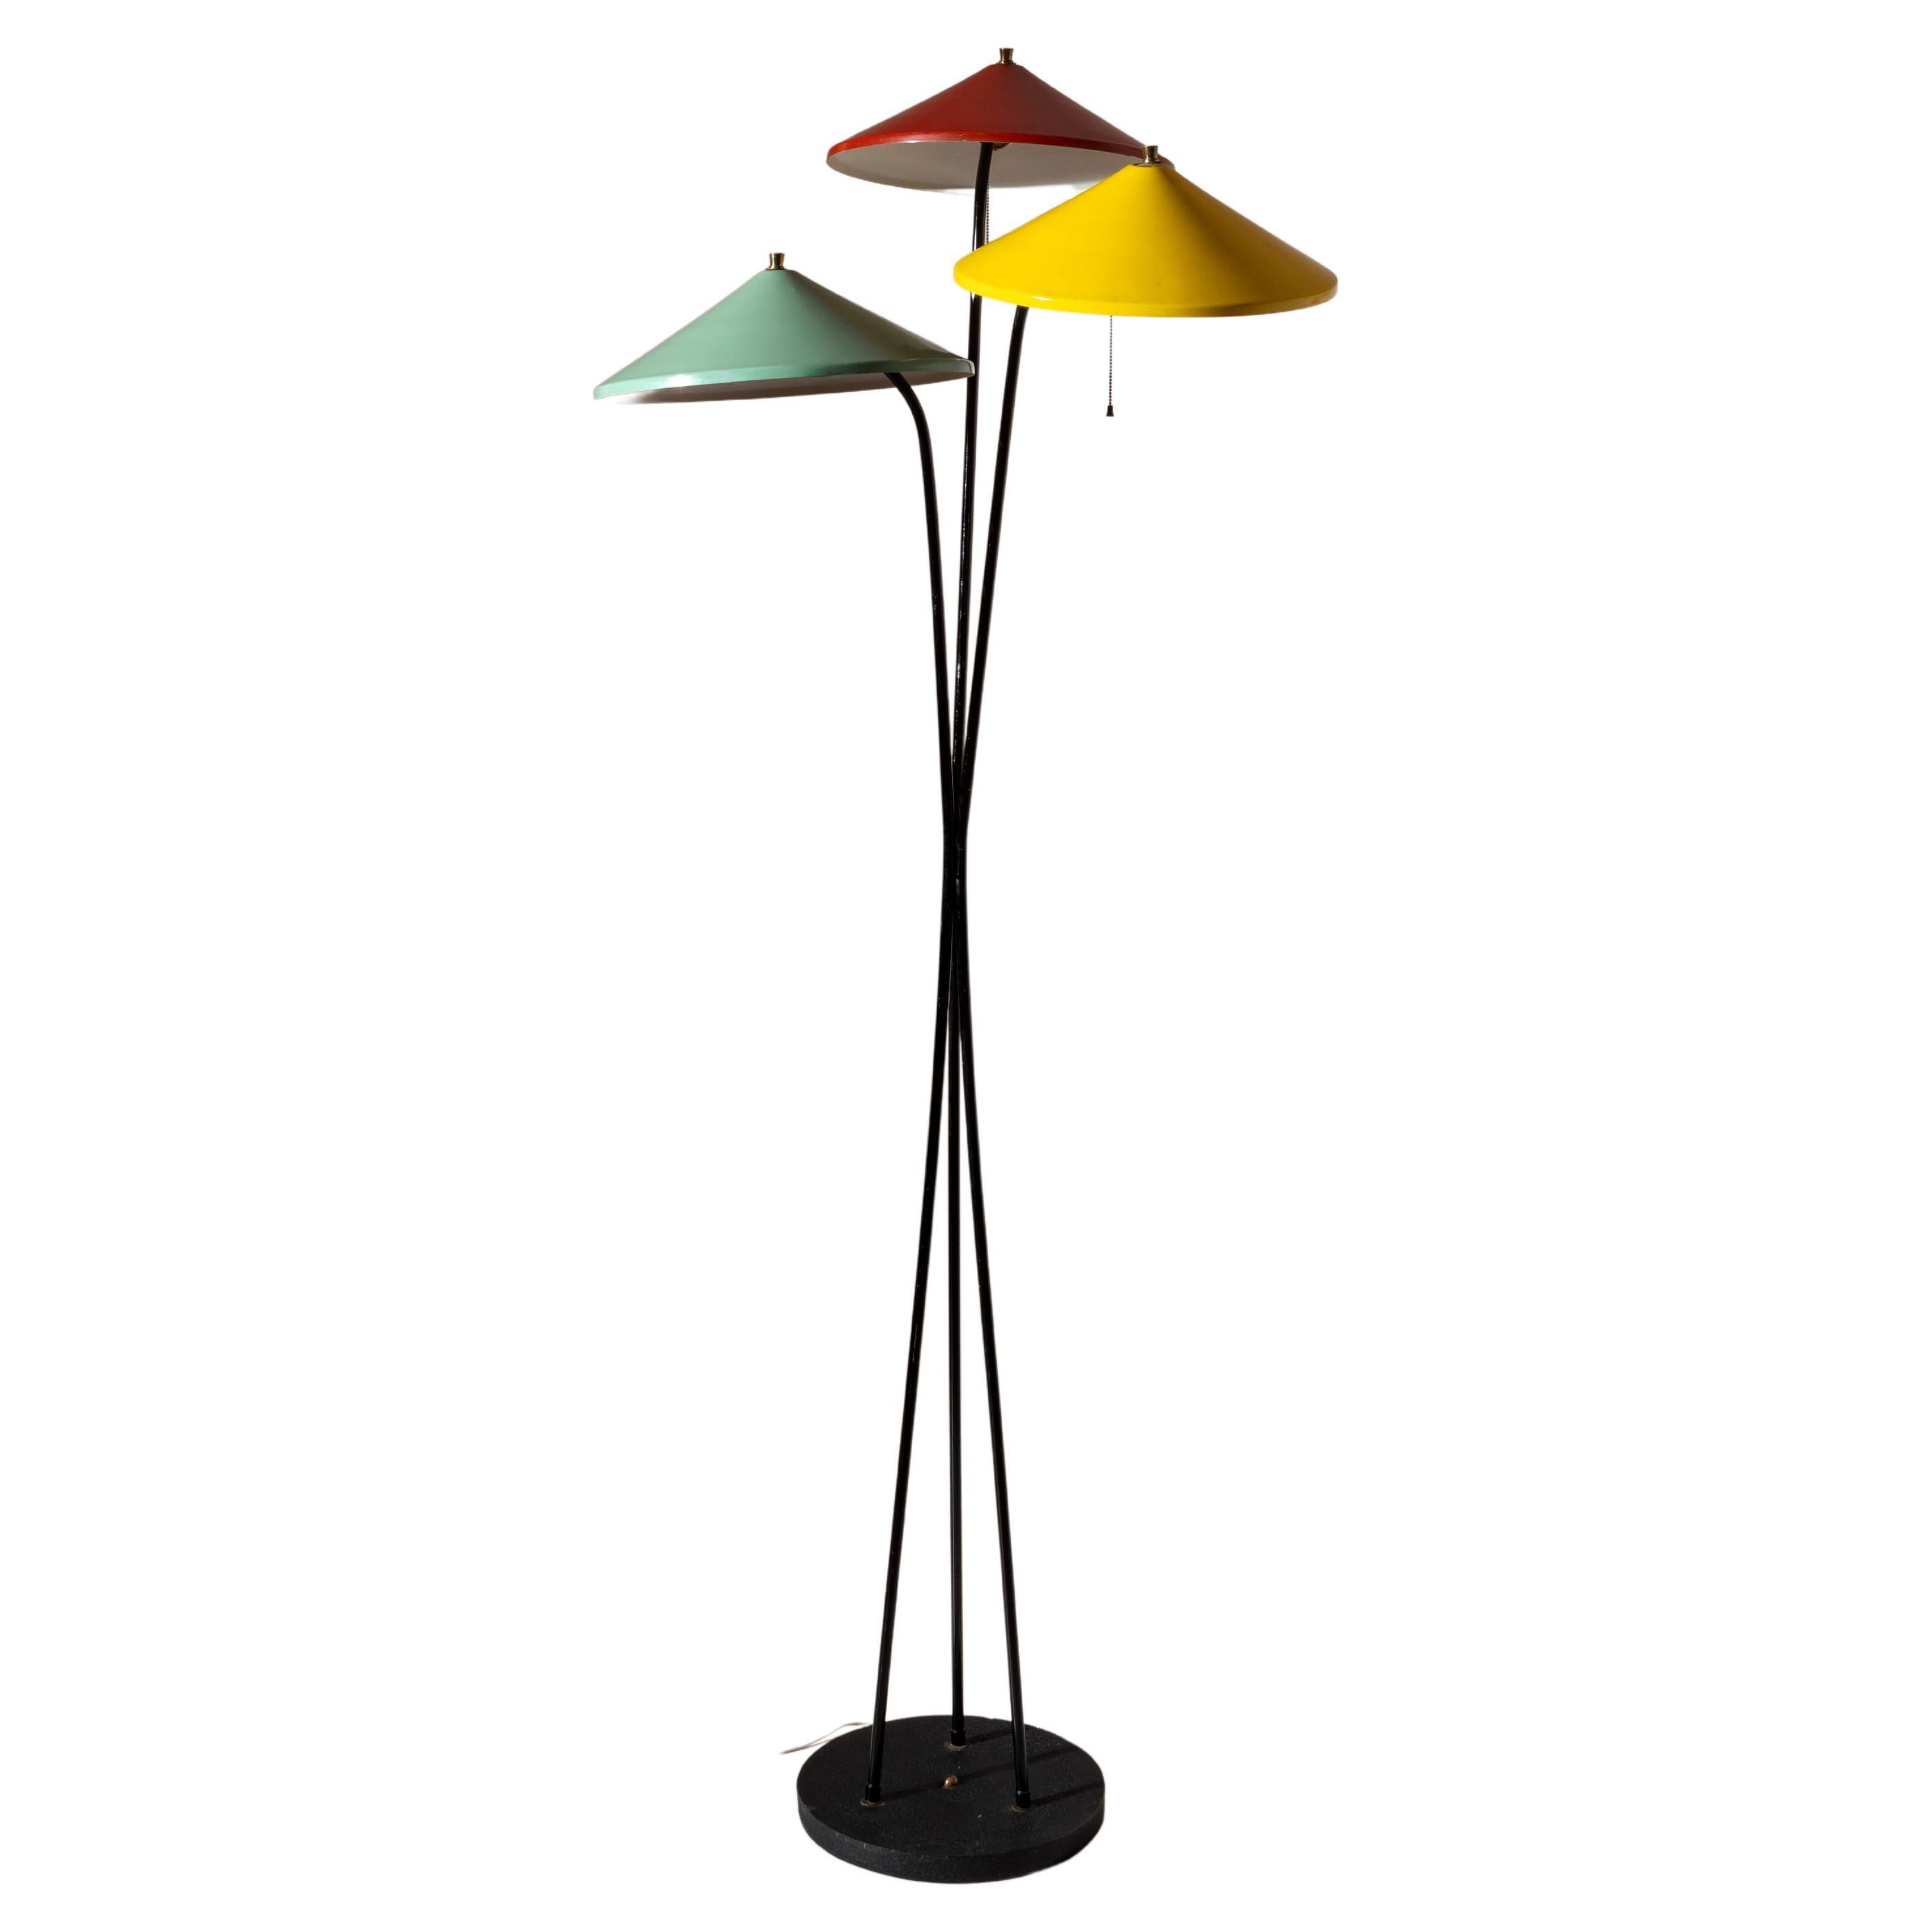 Stilnovo floor lamp in metal with colored lampshades, Italy, 1950s For Sale